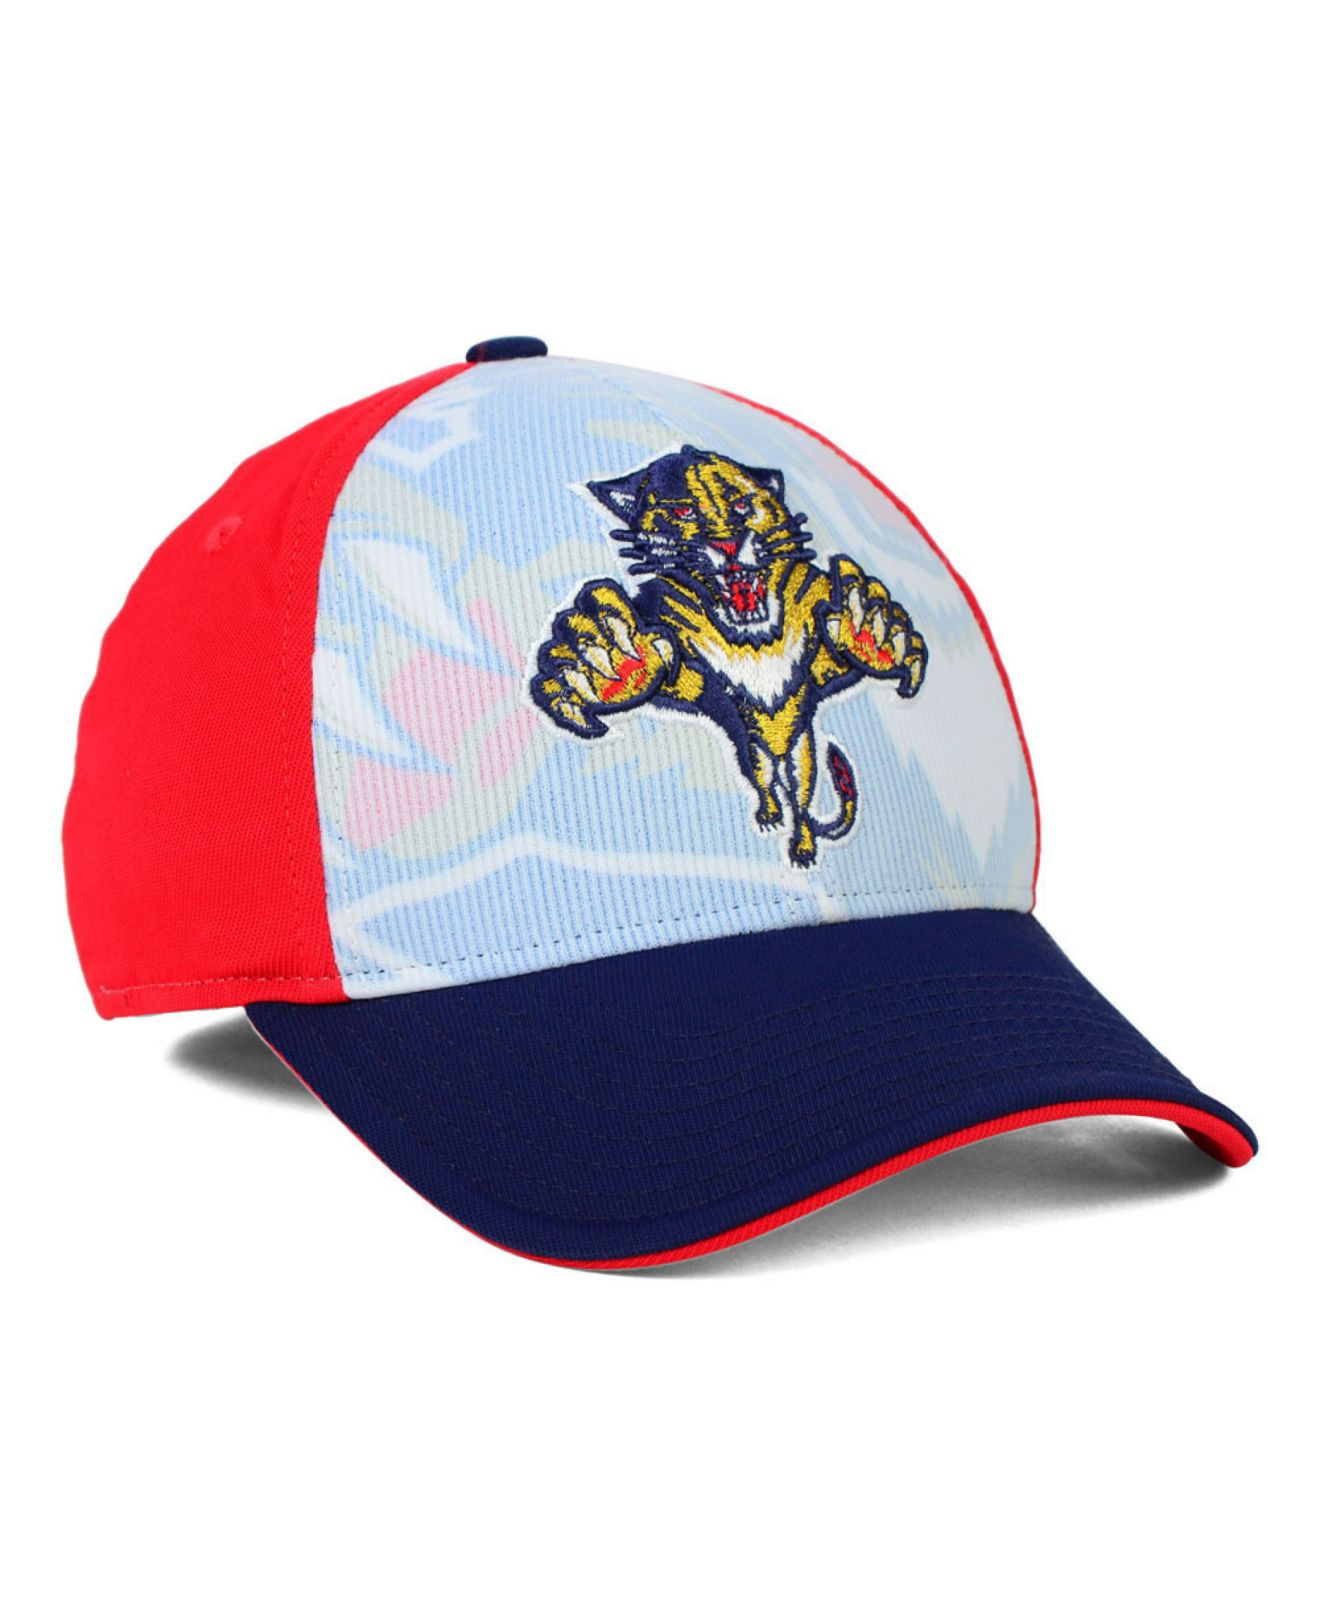 Lyst - Reebok Florida Panthers Stretch-Fit Cap in Blue for Men